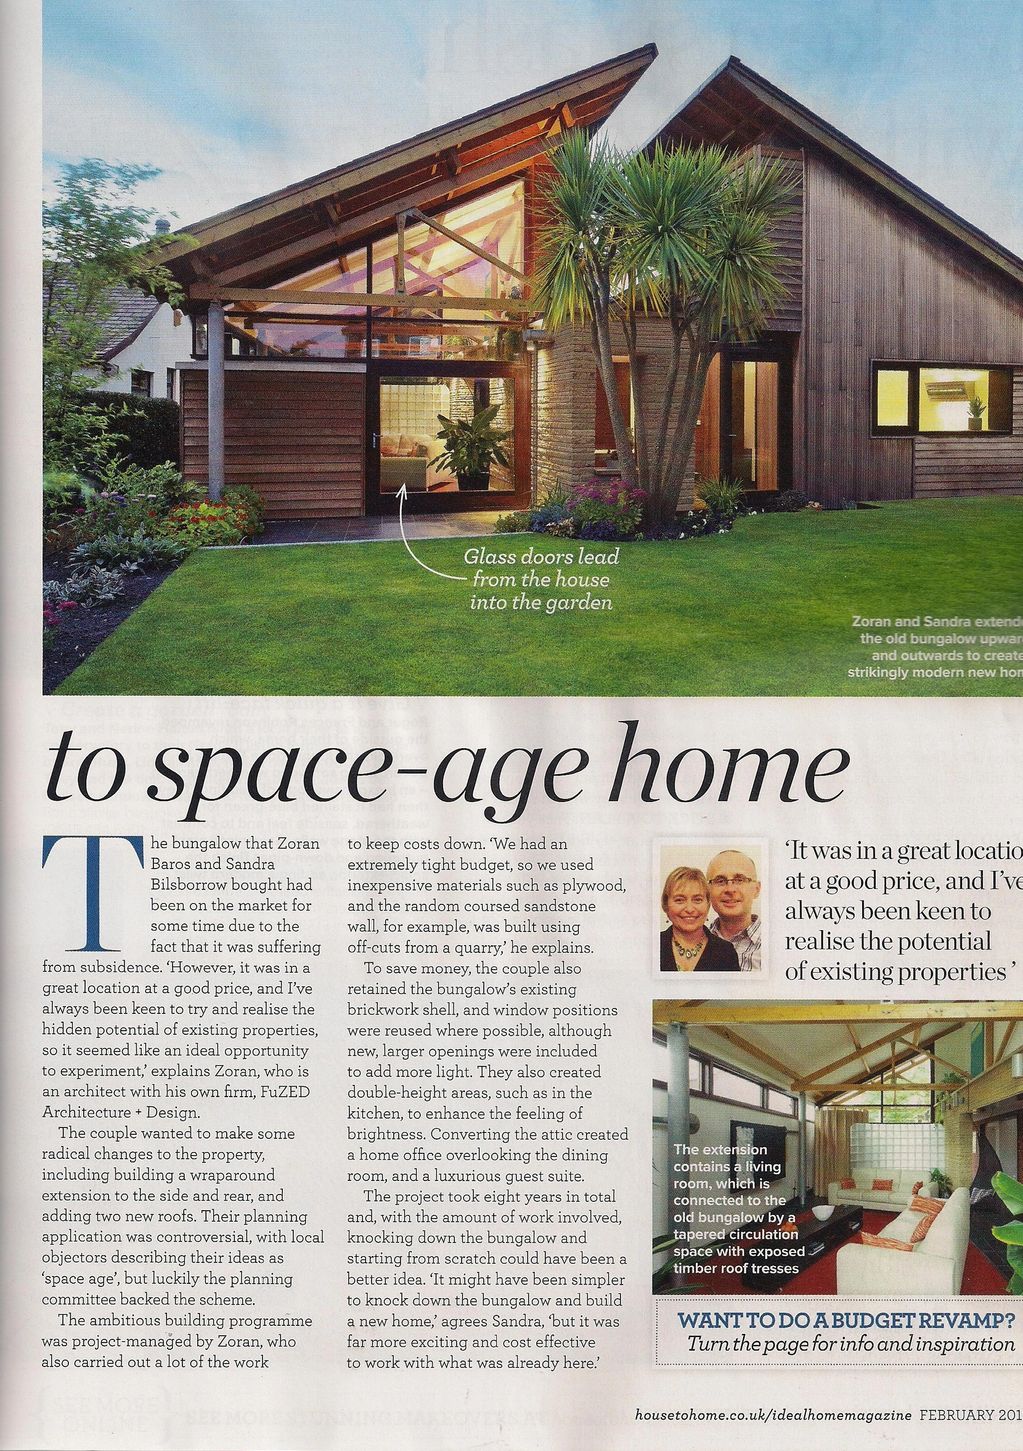 Ideal home article on Fuzed Architects transformation of a standard bungalow to a sleek modern home